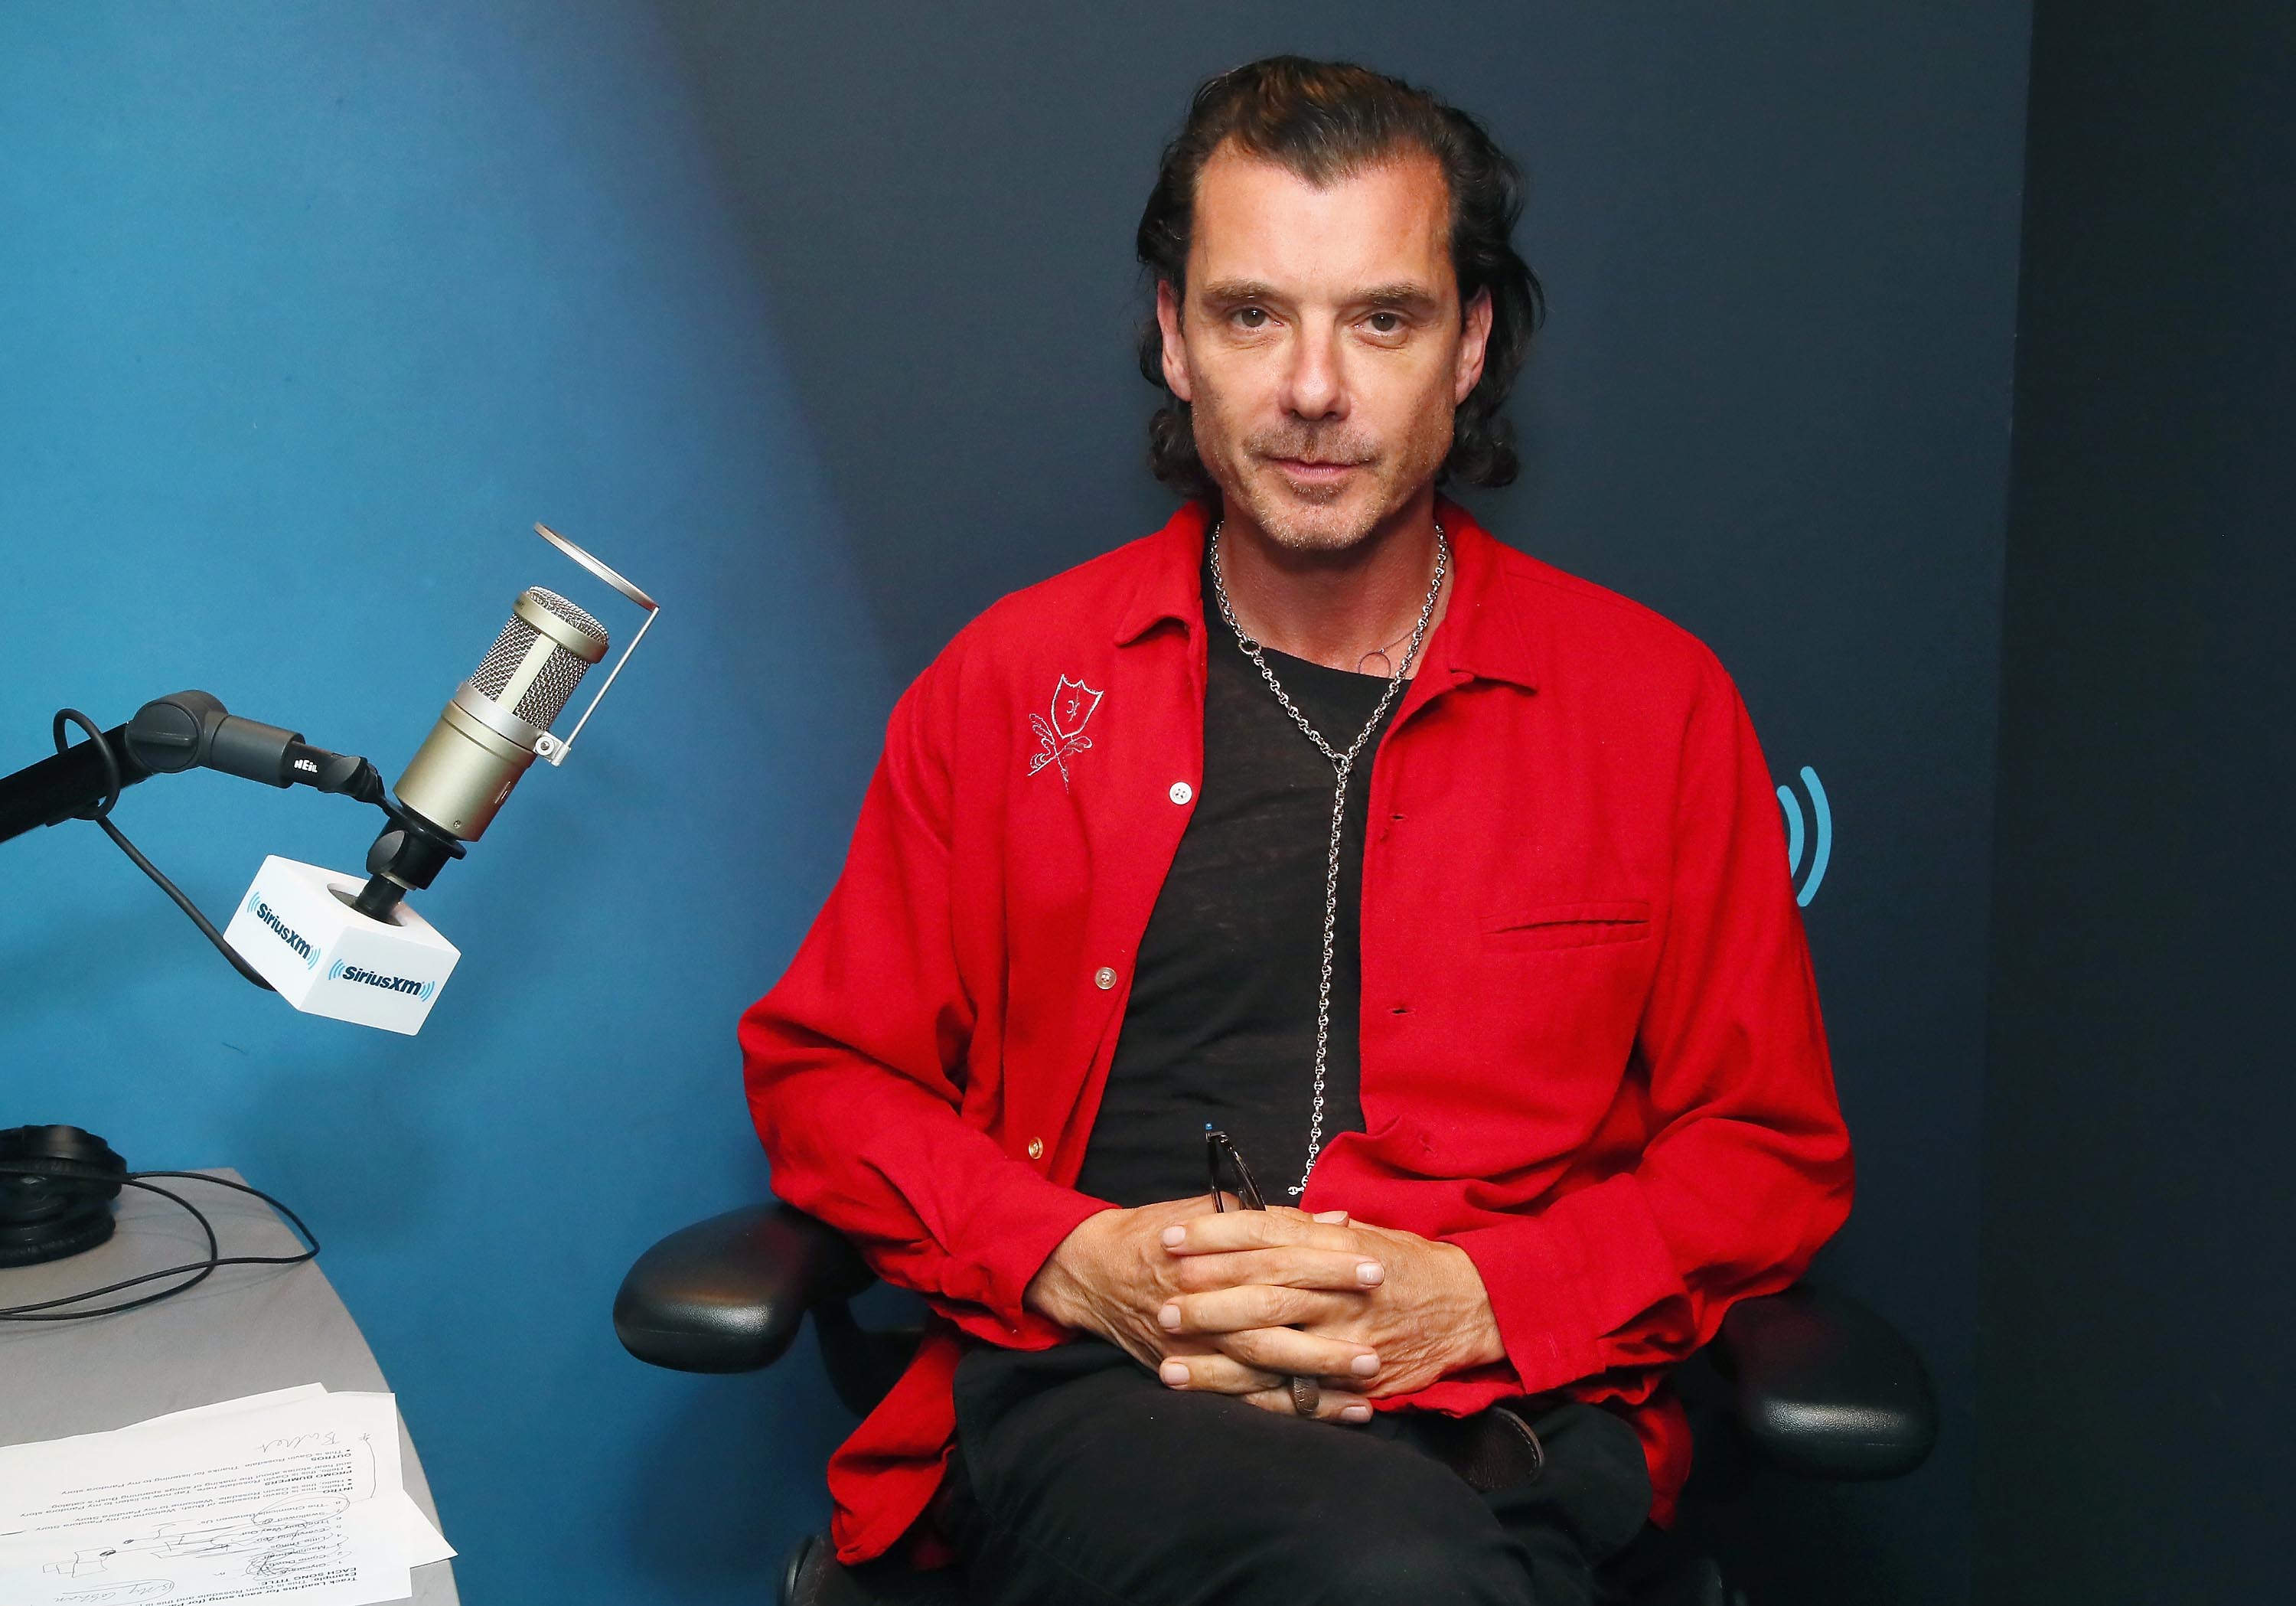 Gavin Rossdale and Gwen were married for nearly 13 years